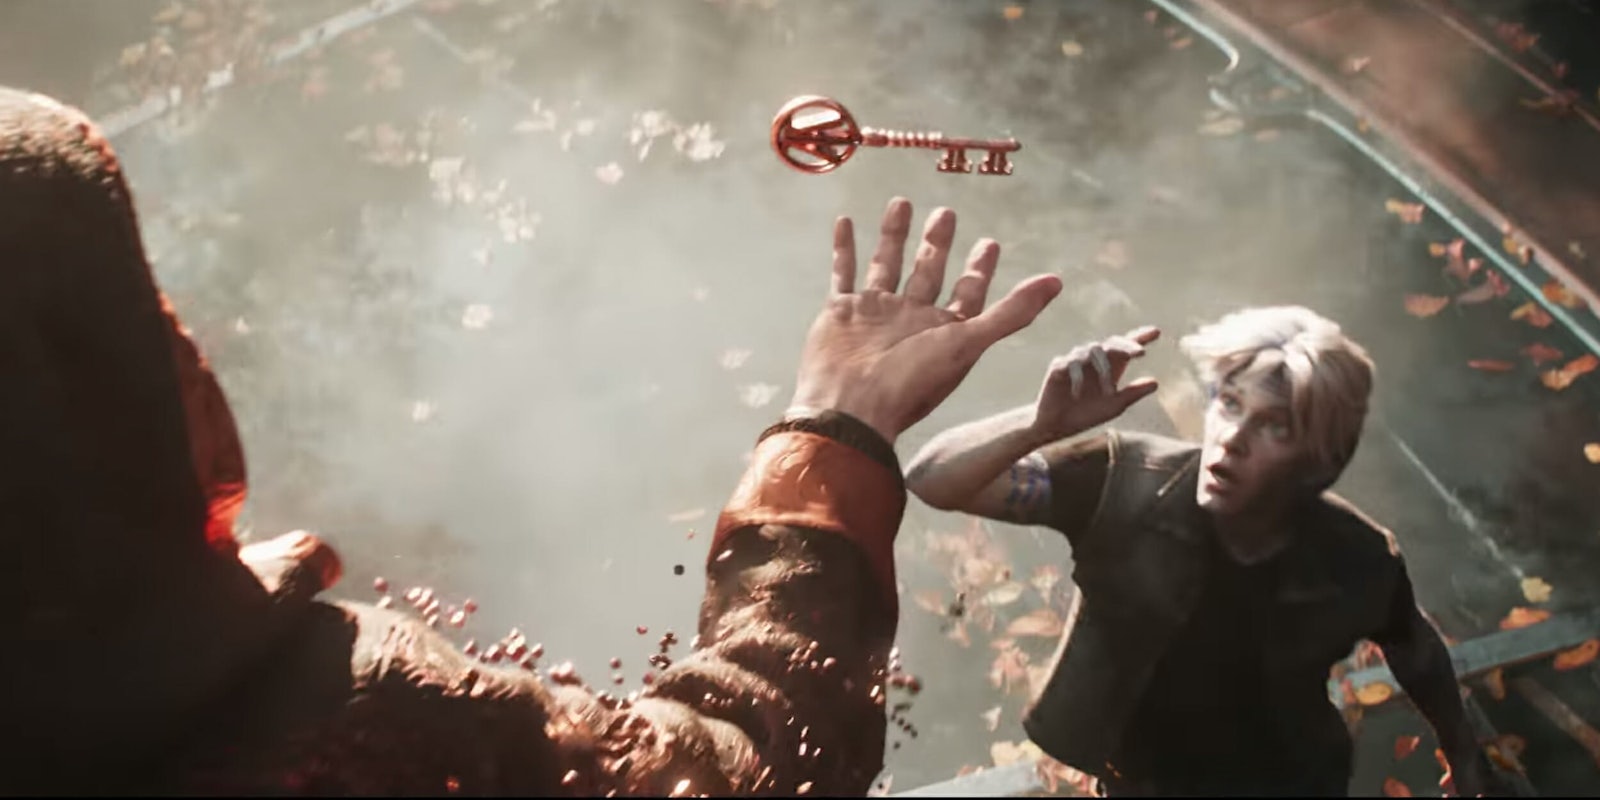 Ready Player One screenshot of character reaching for key